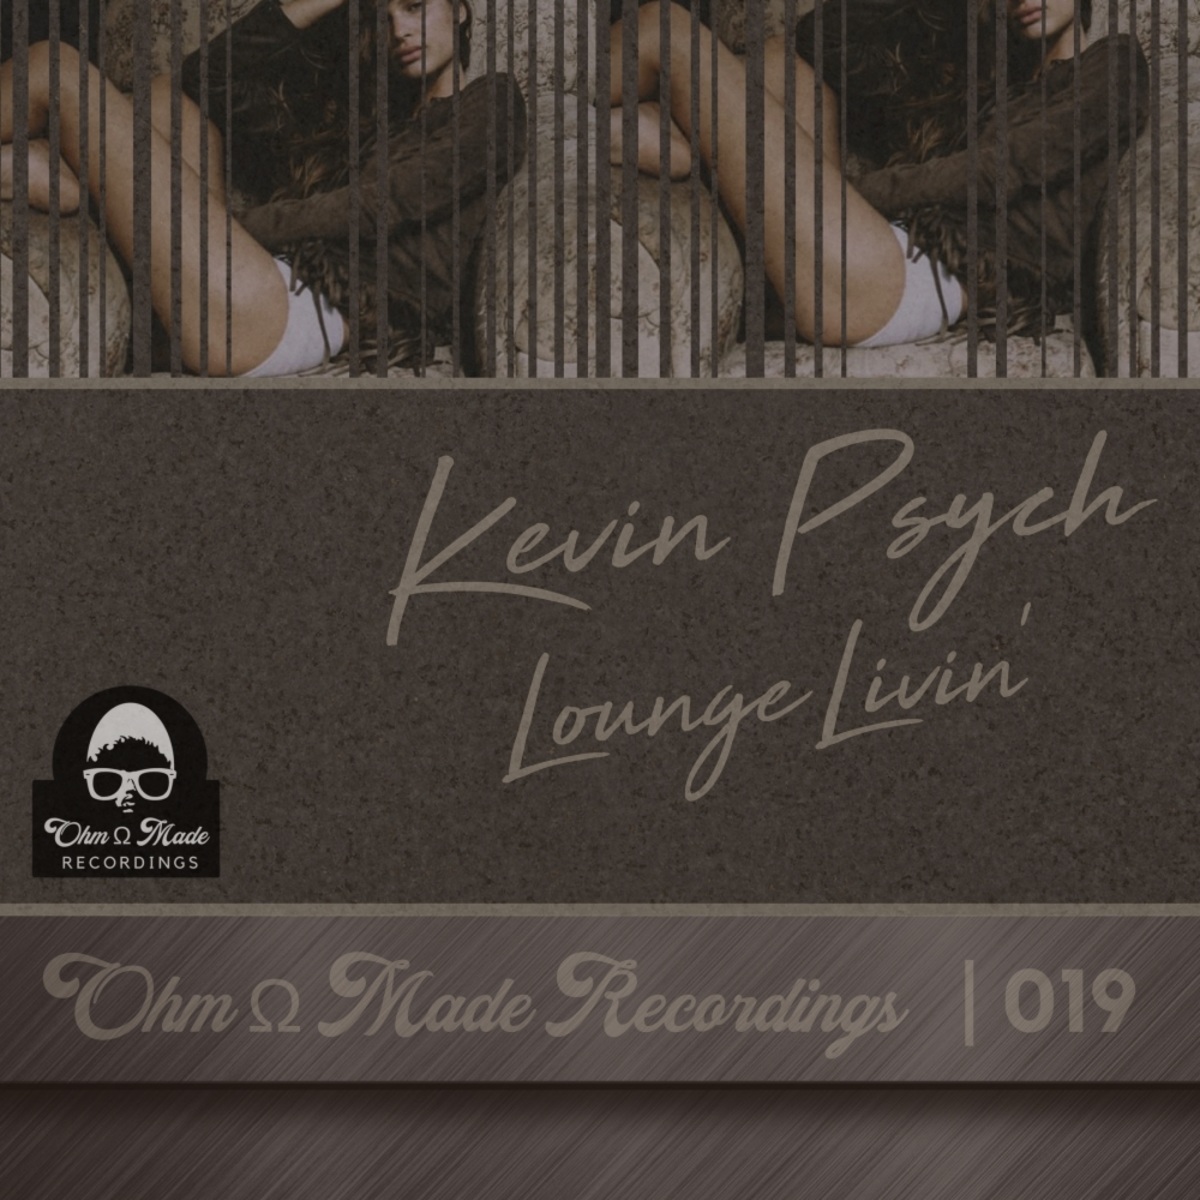 Kevin Psych - Lounge Livin' / Ohm Made Recordings